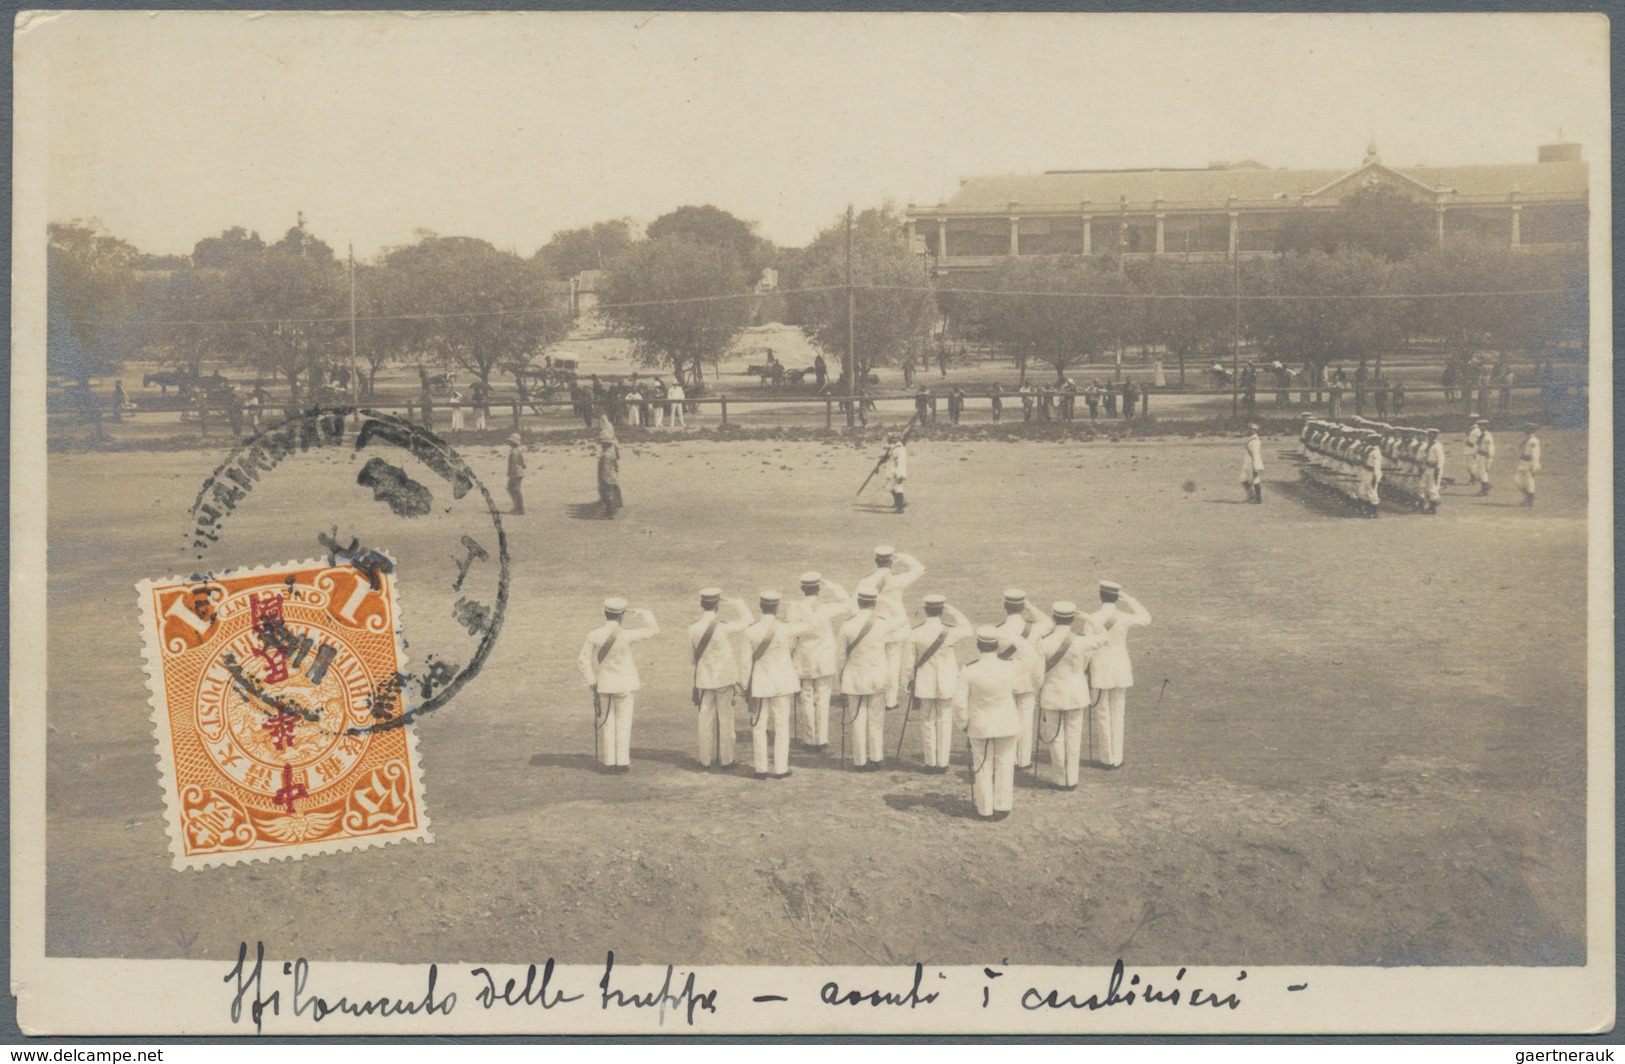 Italienische Post In China: 1913. Photographic Picture Post Card Of 'The Italian Troops On Parade At - Tientsin